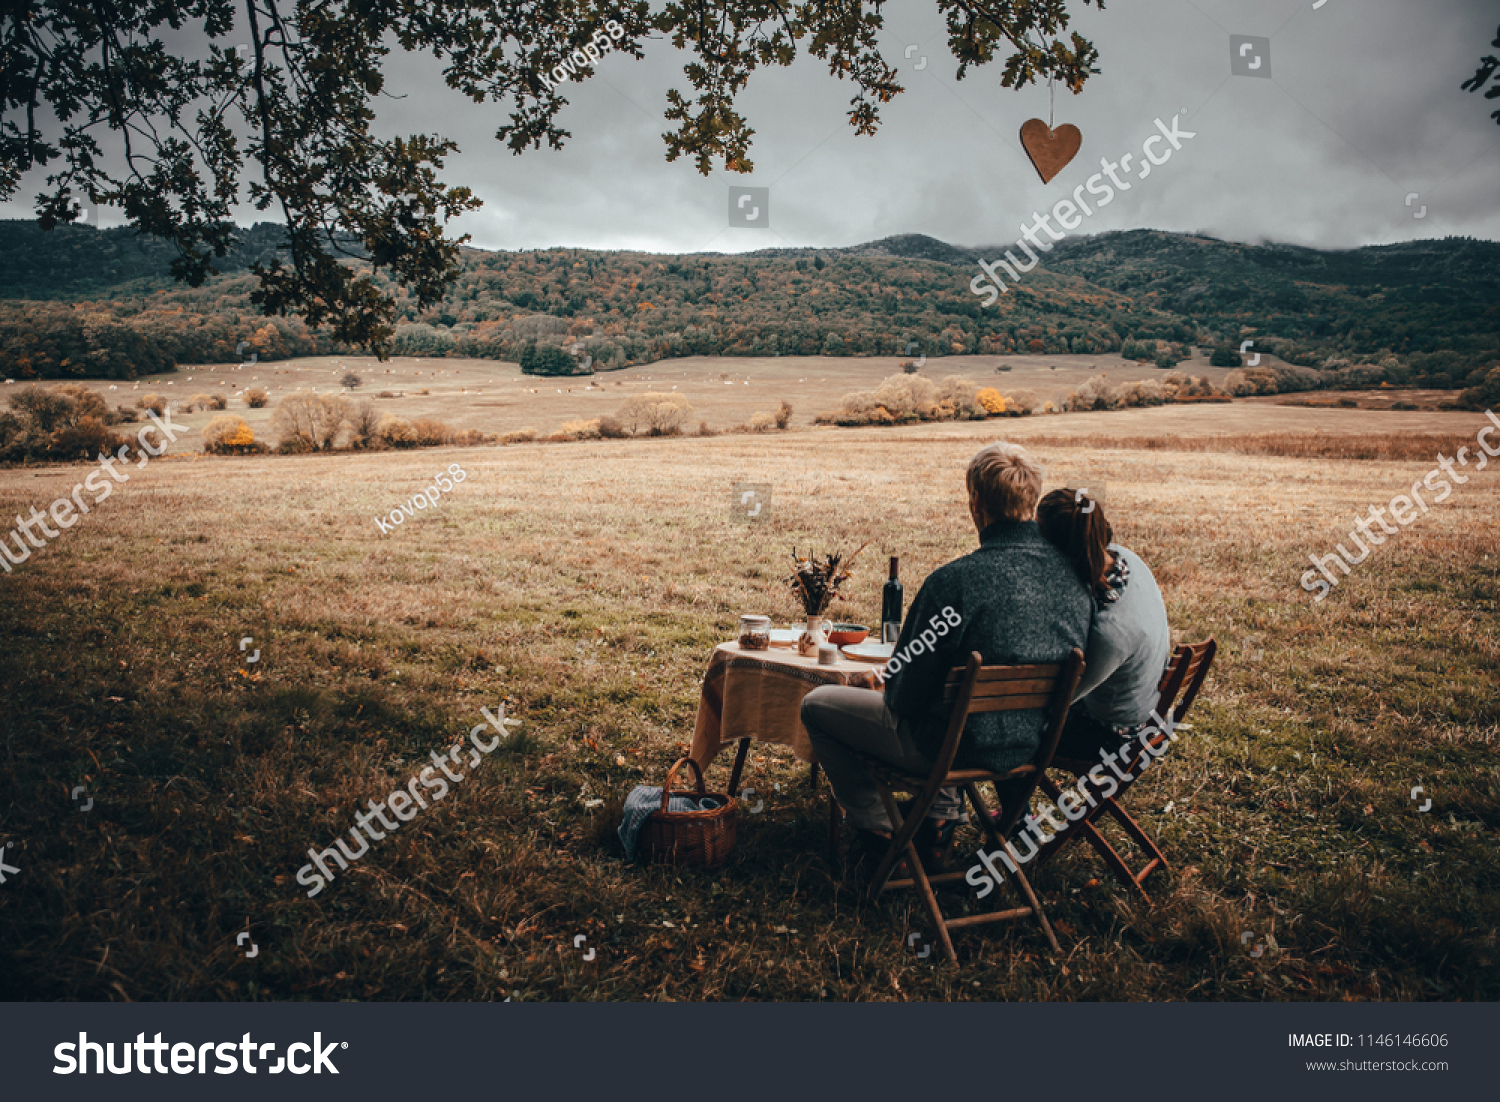 Forudsige møl forklædning Couple Love Date Time Picnic Nature Stock Photo (Edit Now) 1146146606